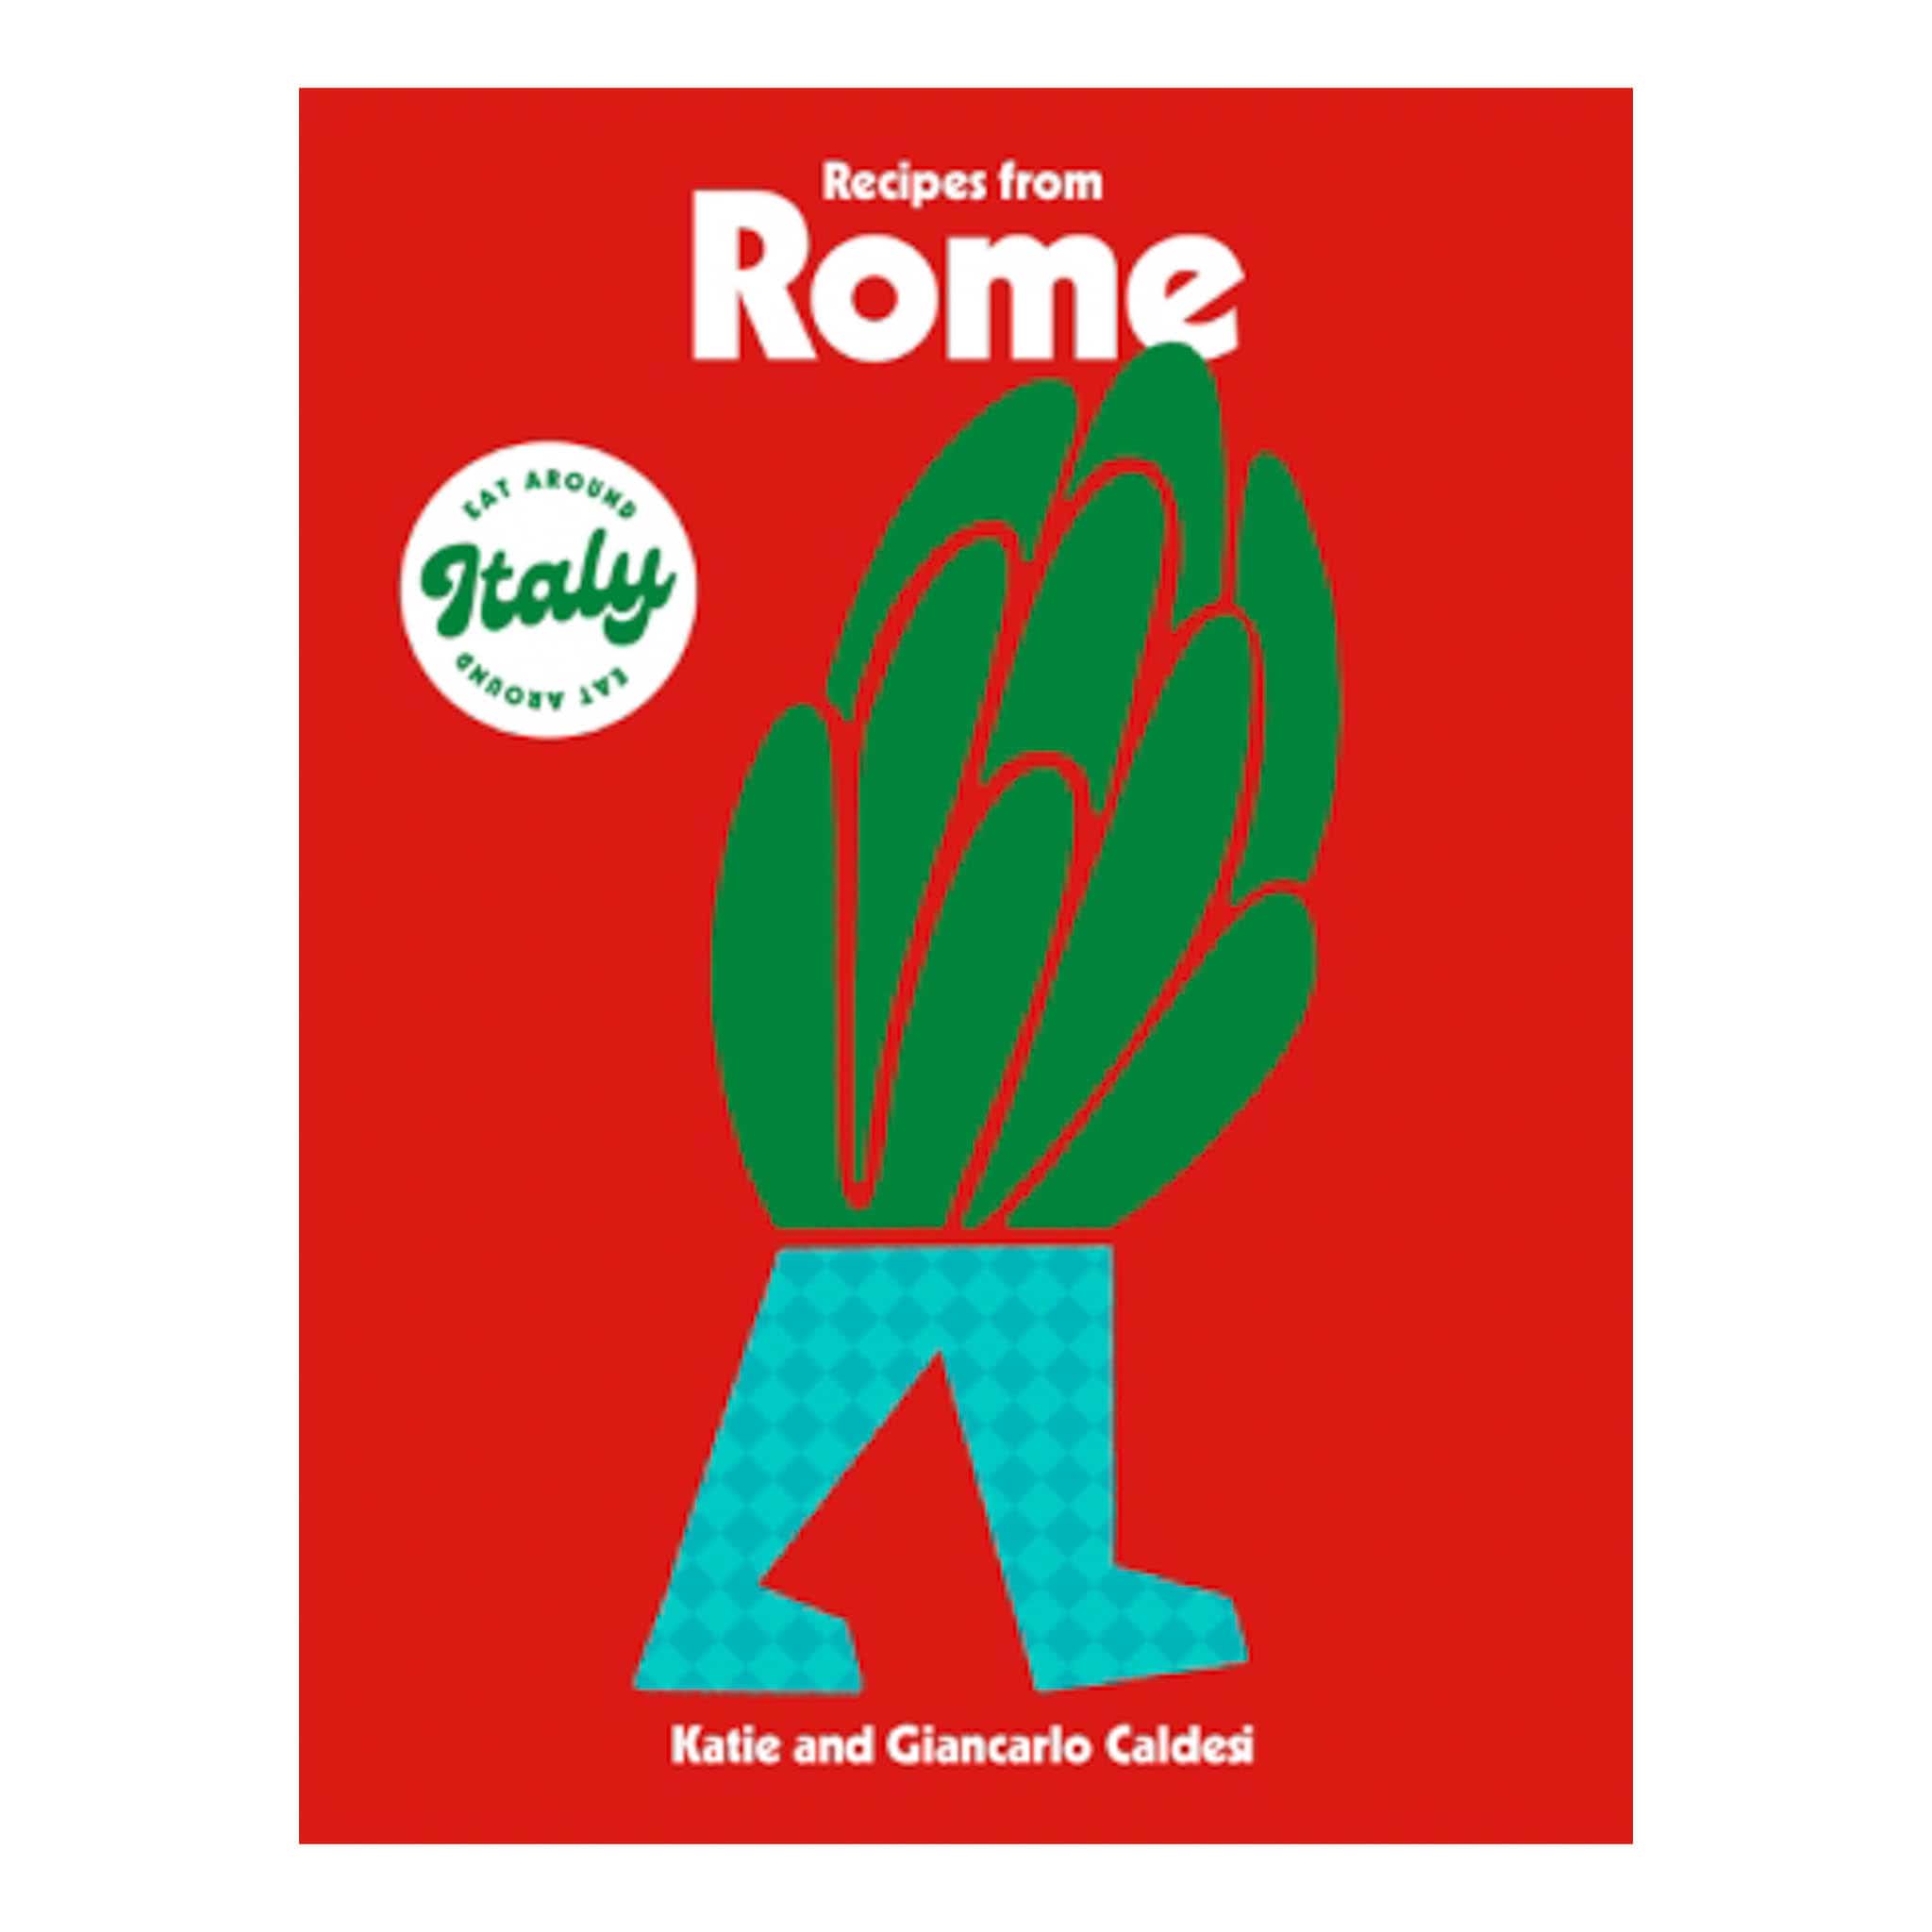 Recipes from Rome, by Katie Caldesi